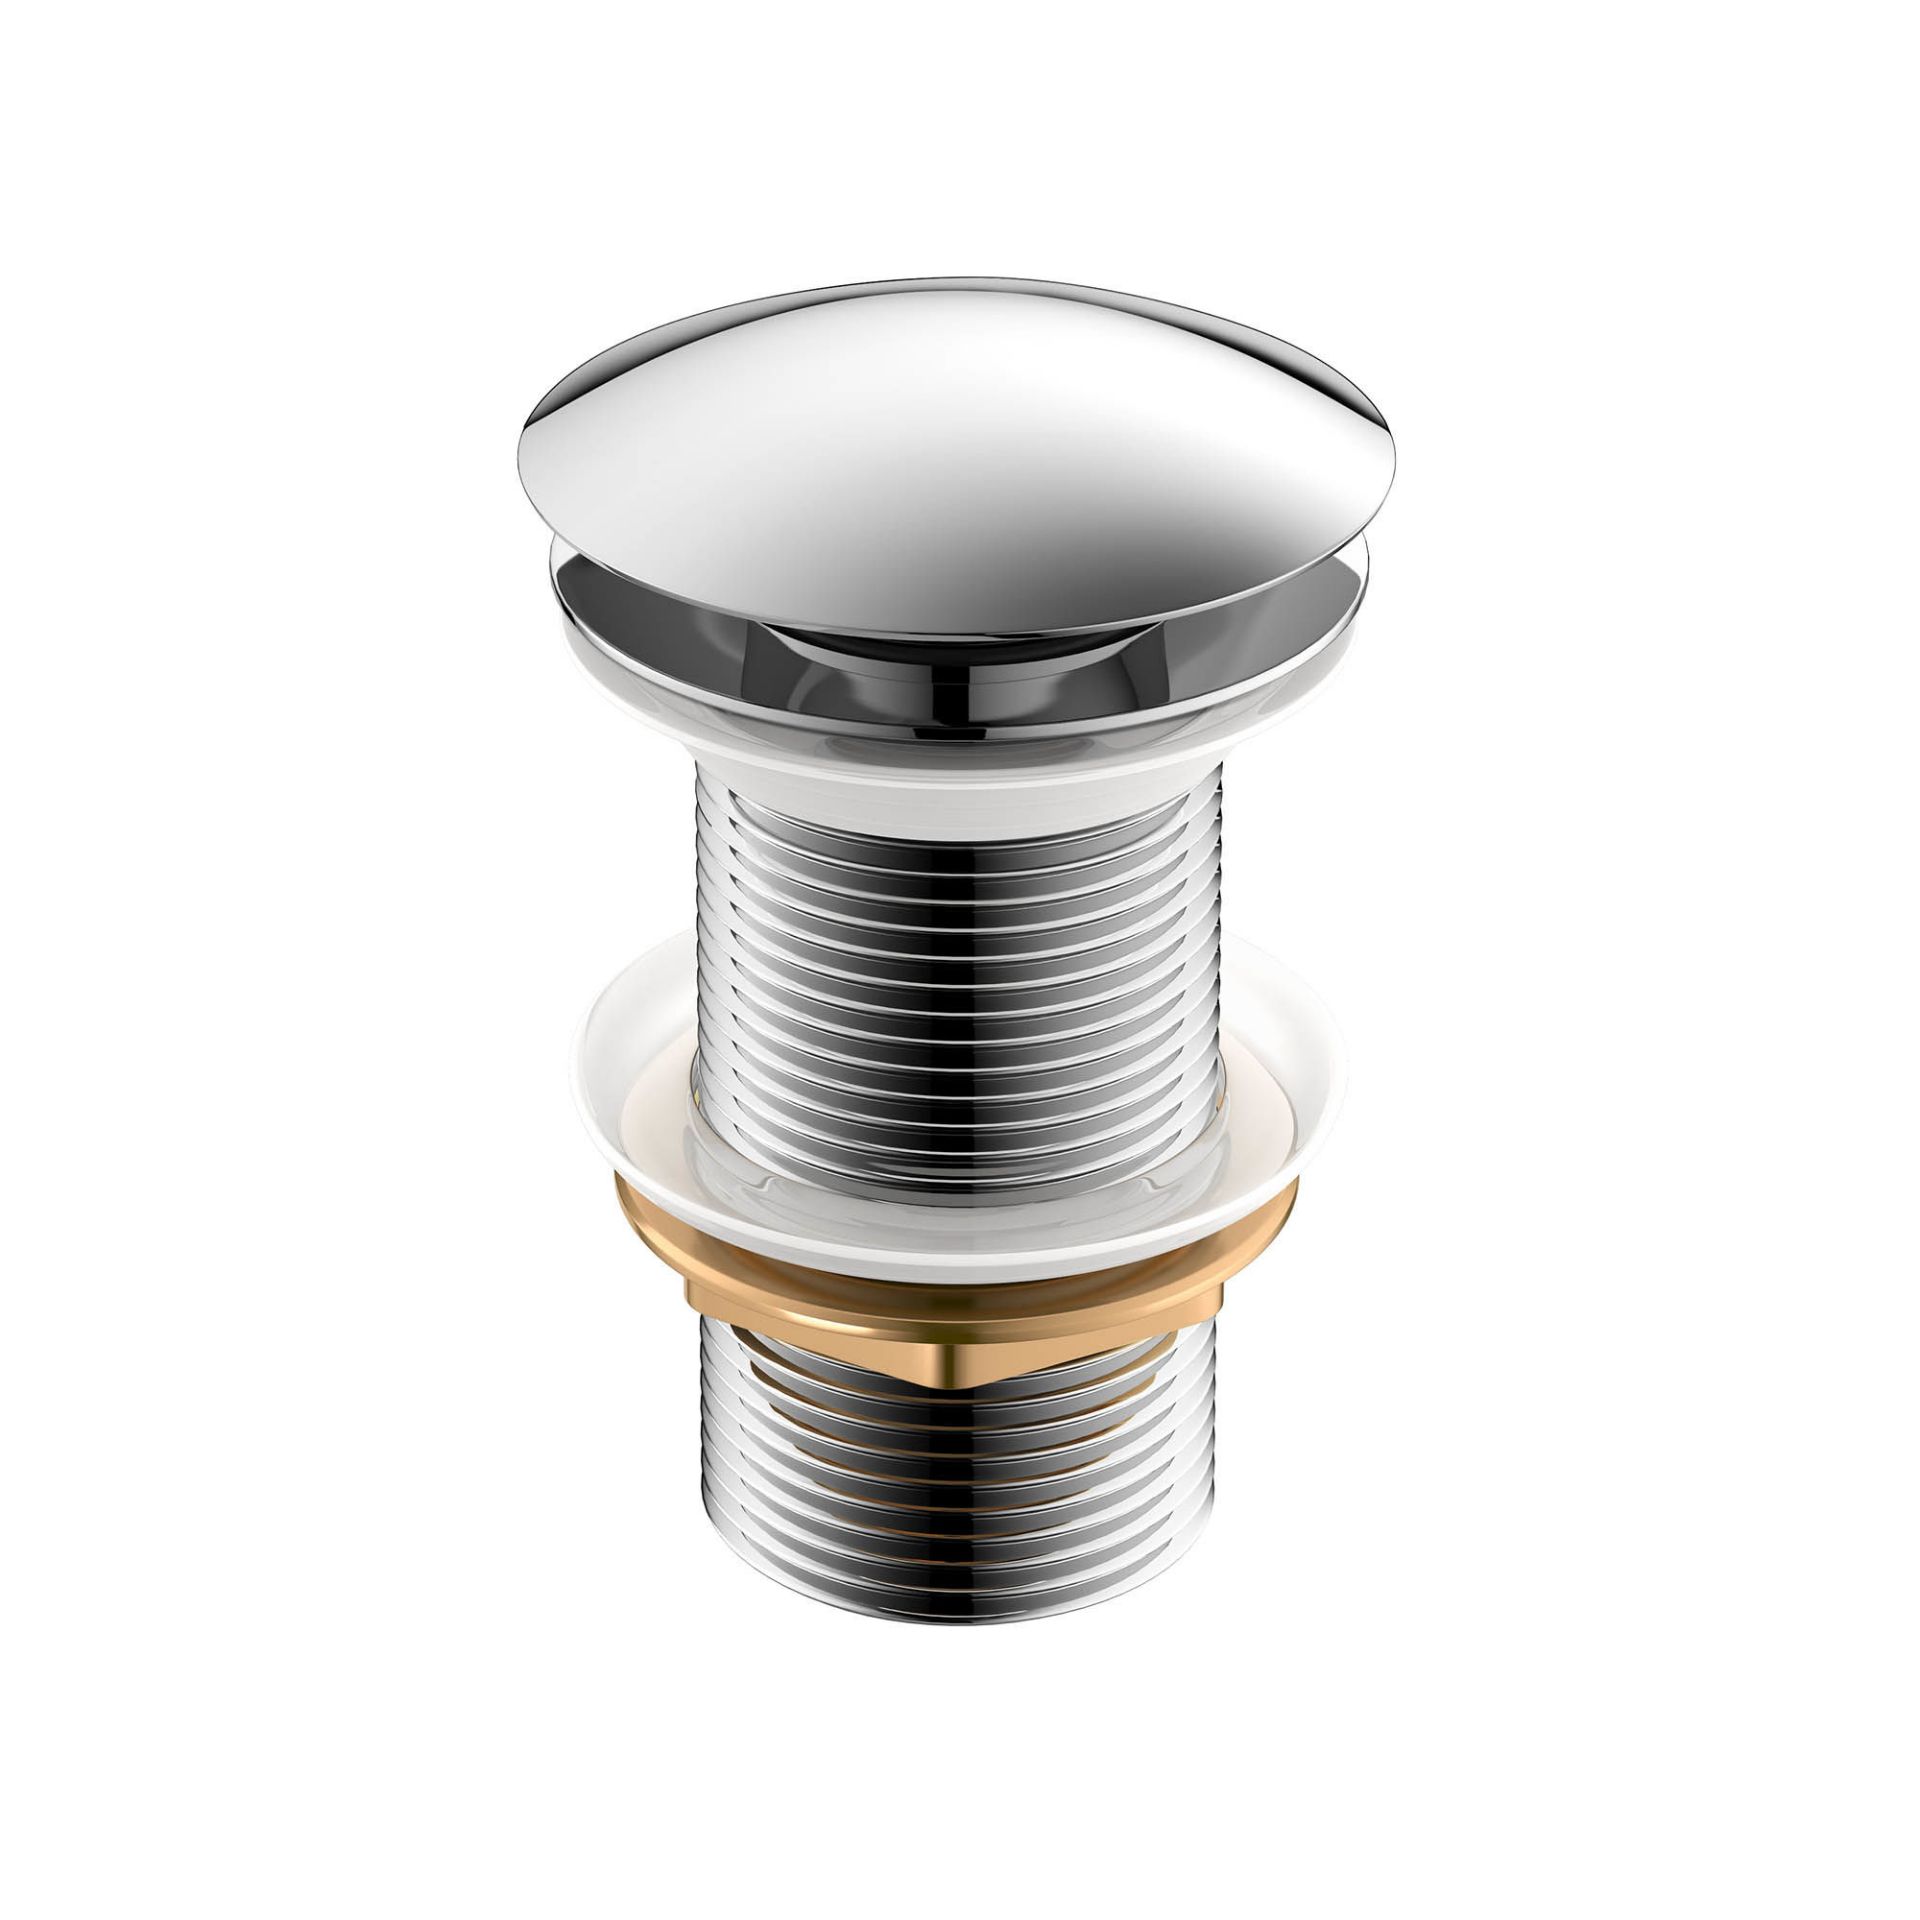 (RK1026) Basin Waste - Unslotted Push Button Pop-Up Made with zinc with solid brass components...